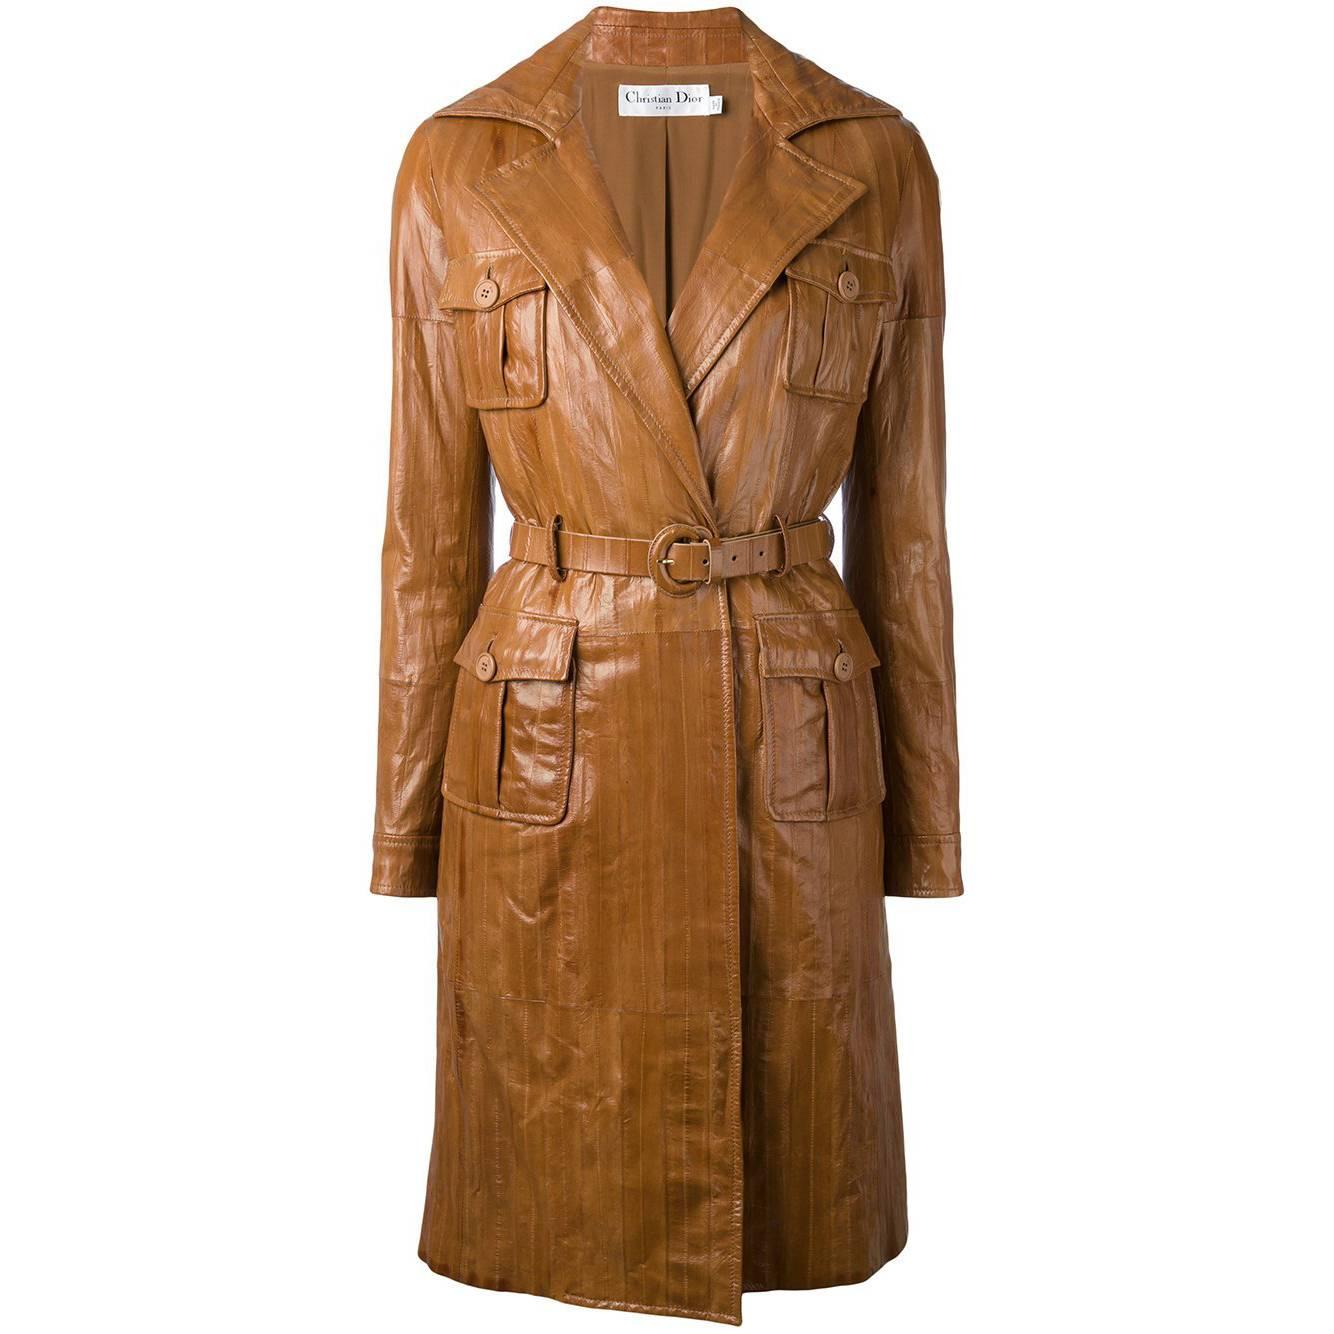 Christian Dior by John Galliano Paneled Eel Leather Coat, 2008 For Sale